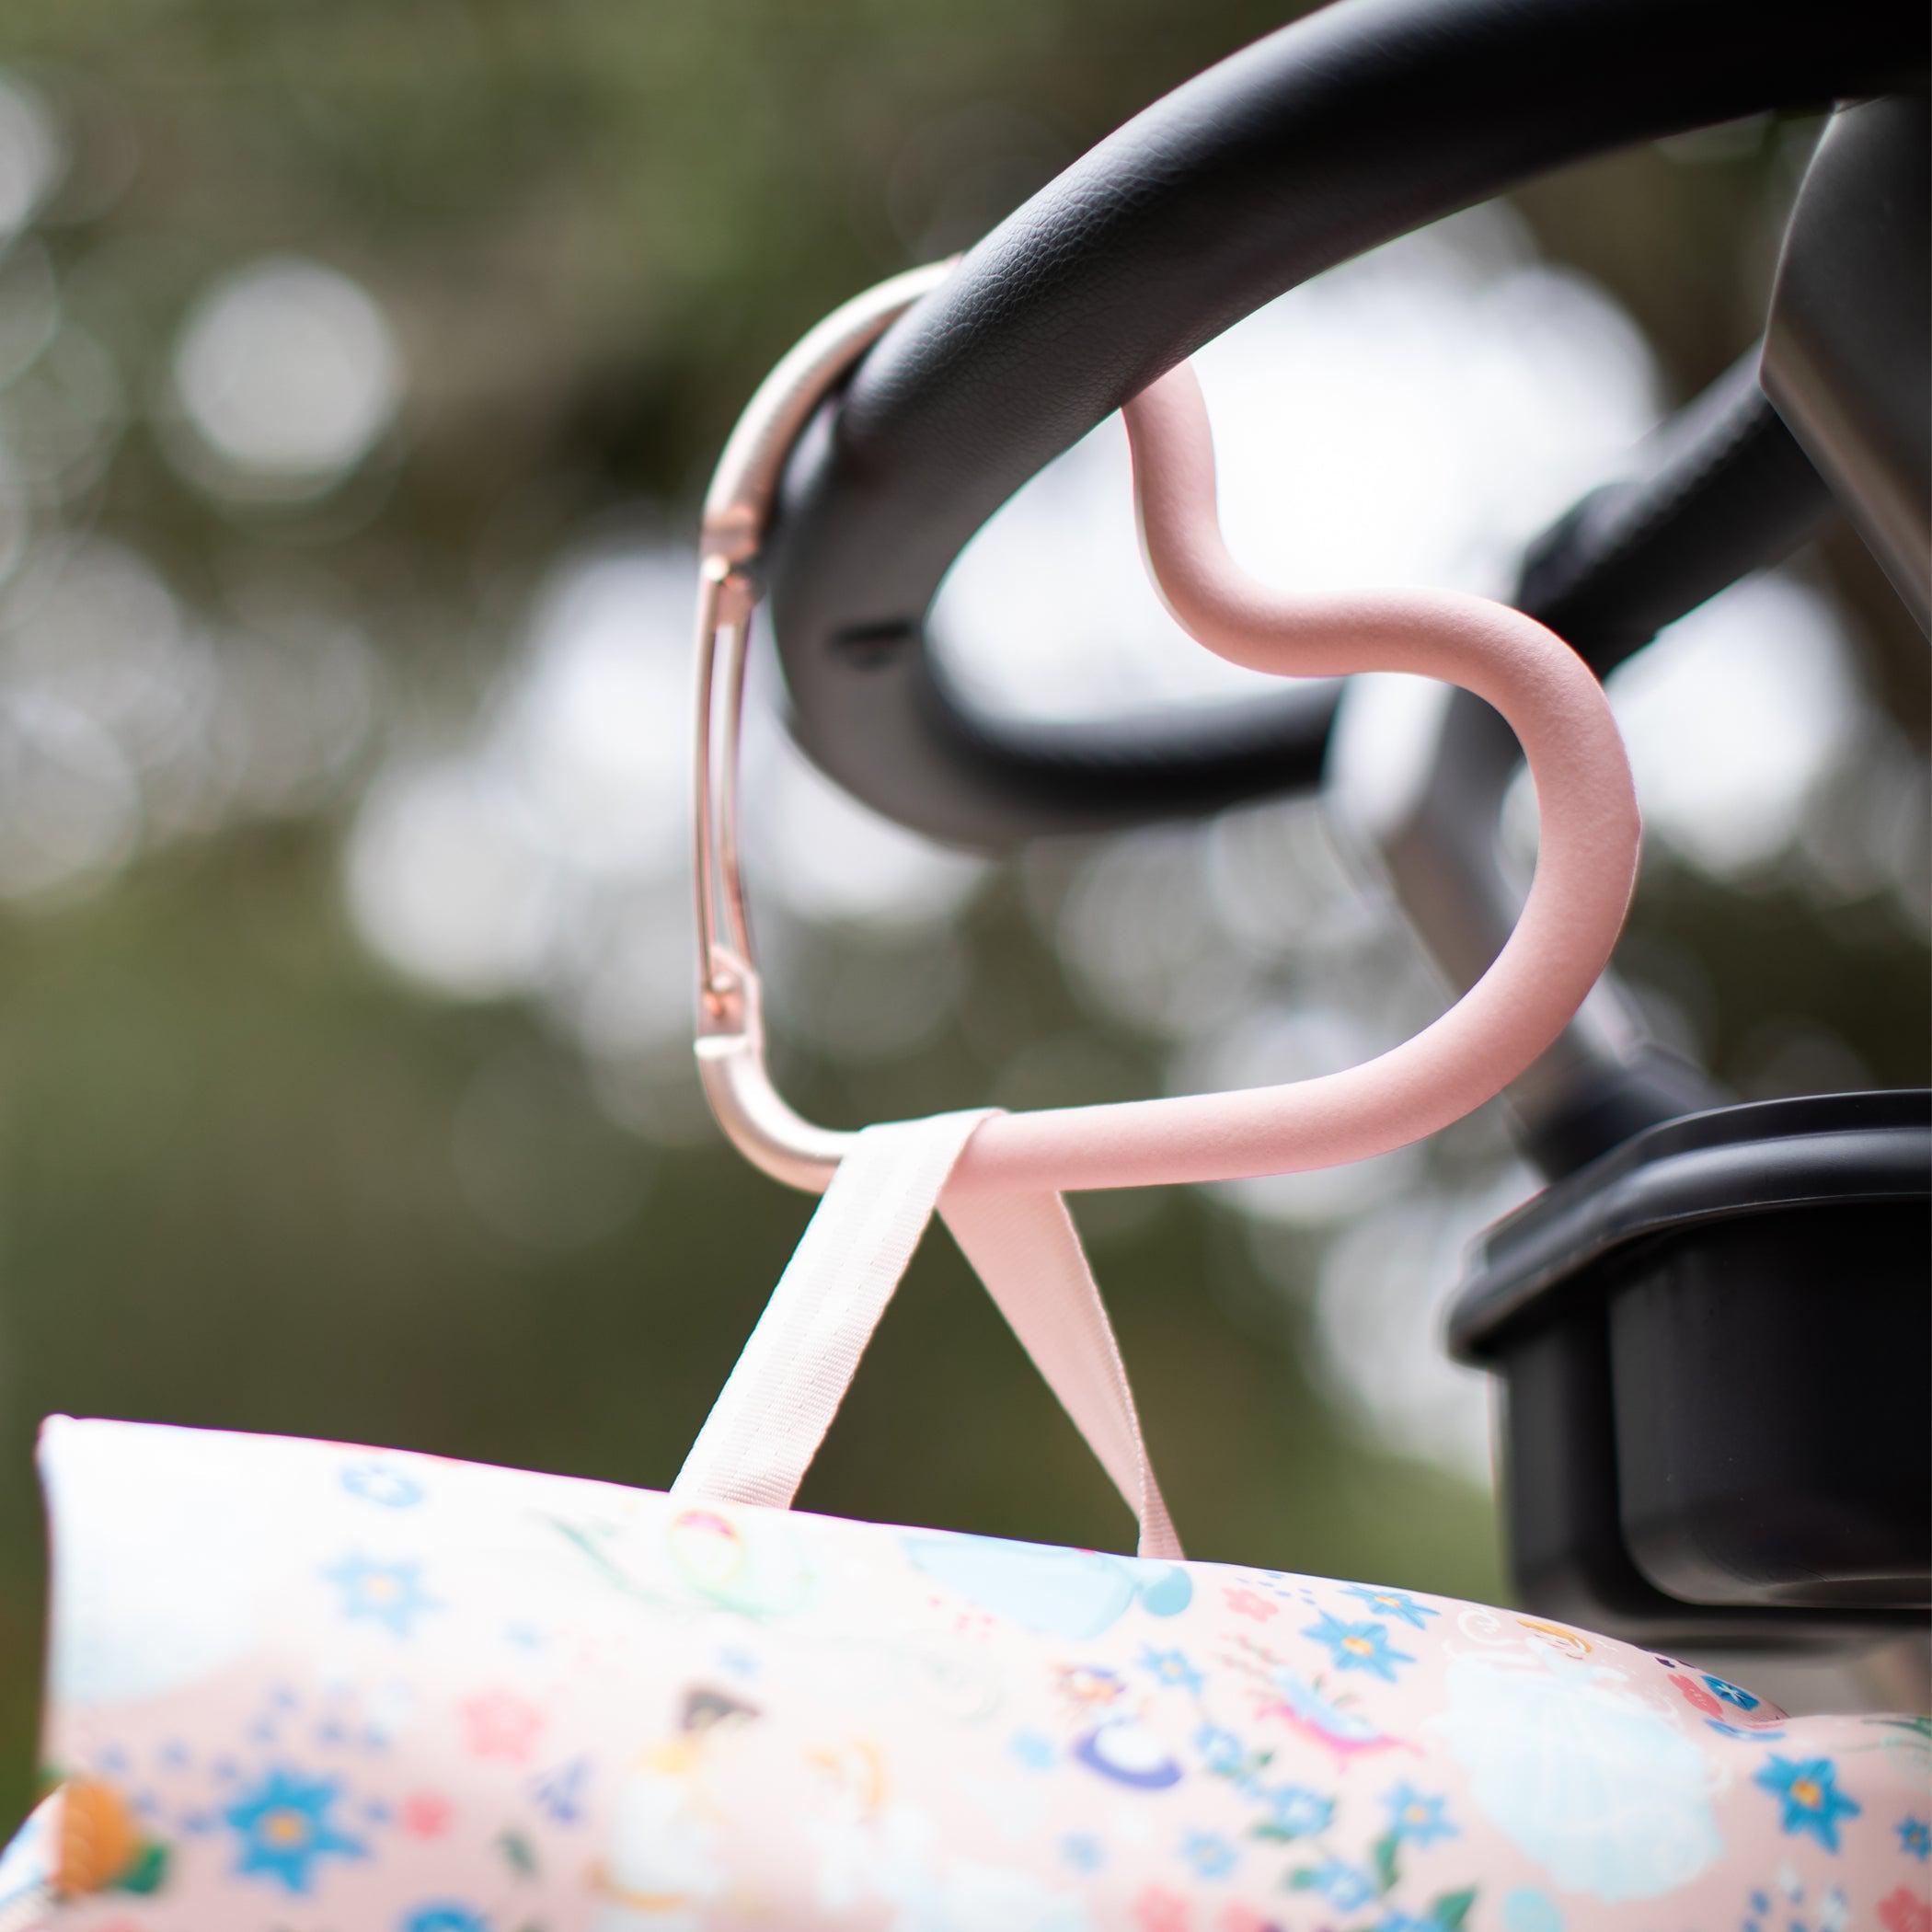 Petunia Pickle Bottom Oh My Heart Universal Stroller Hook in Blush/Rose Gold